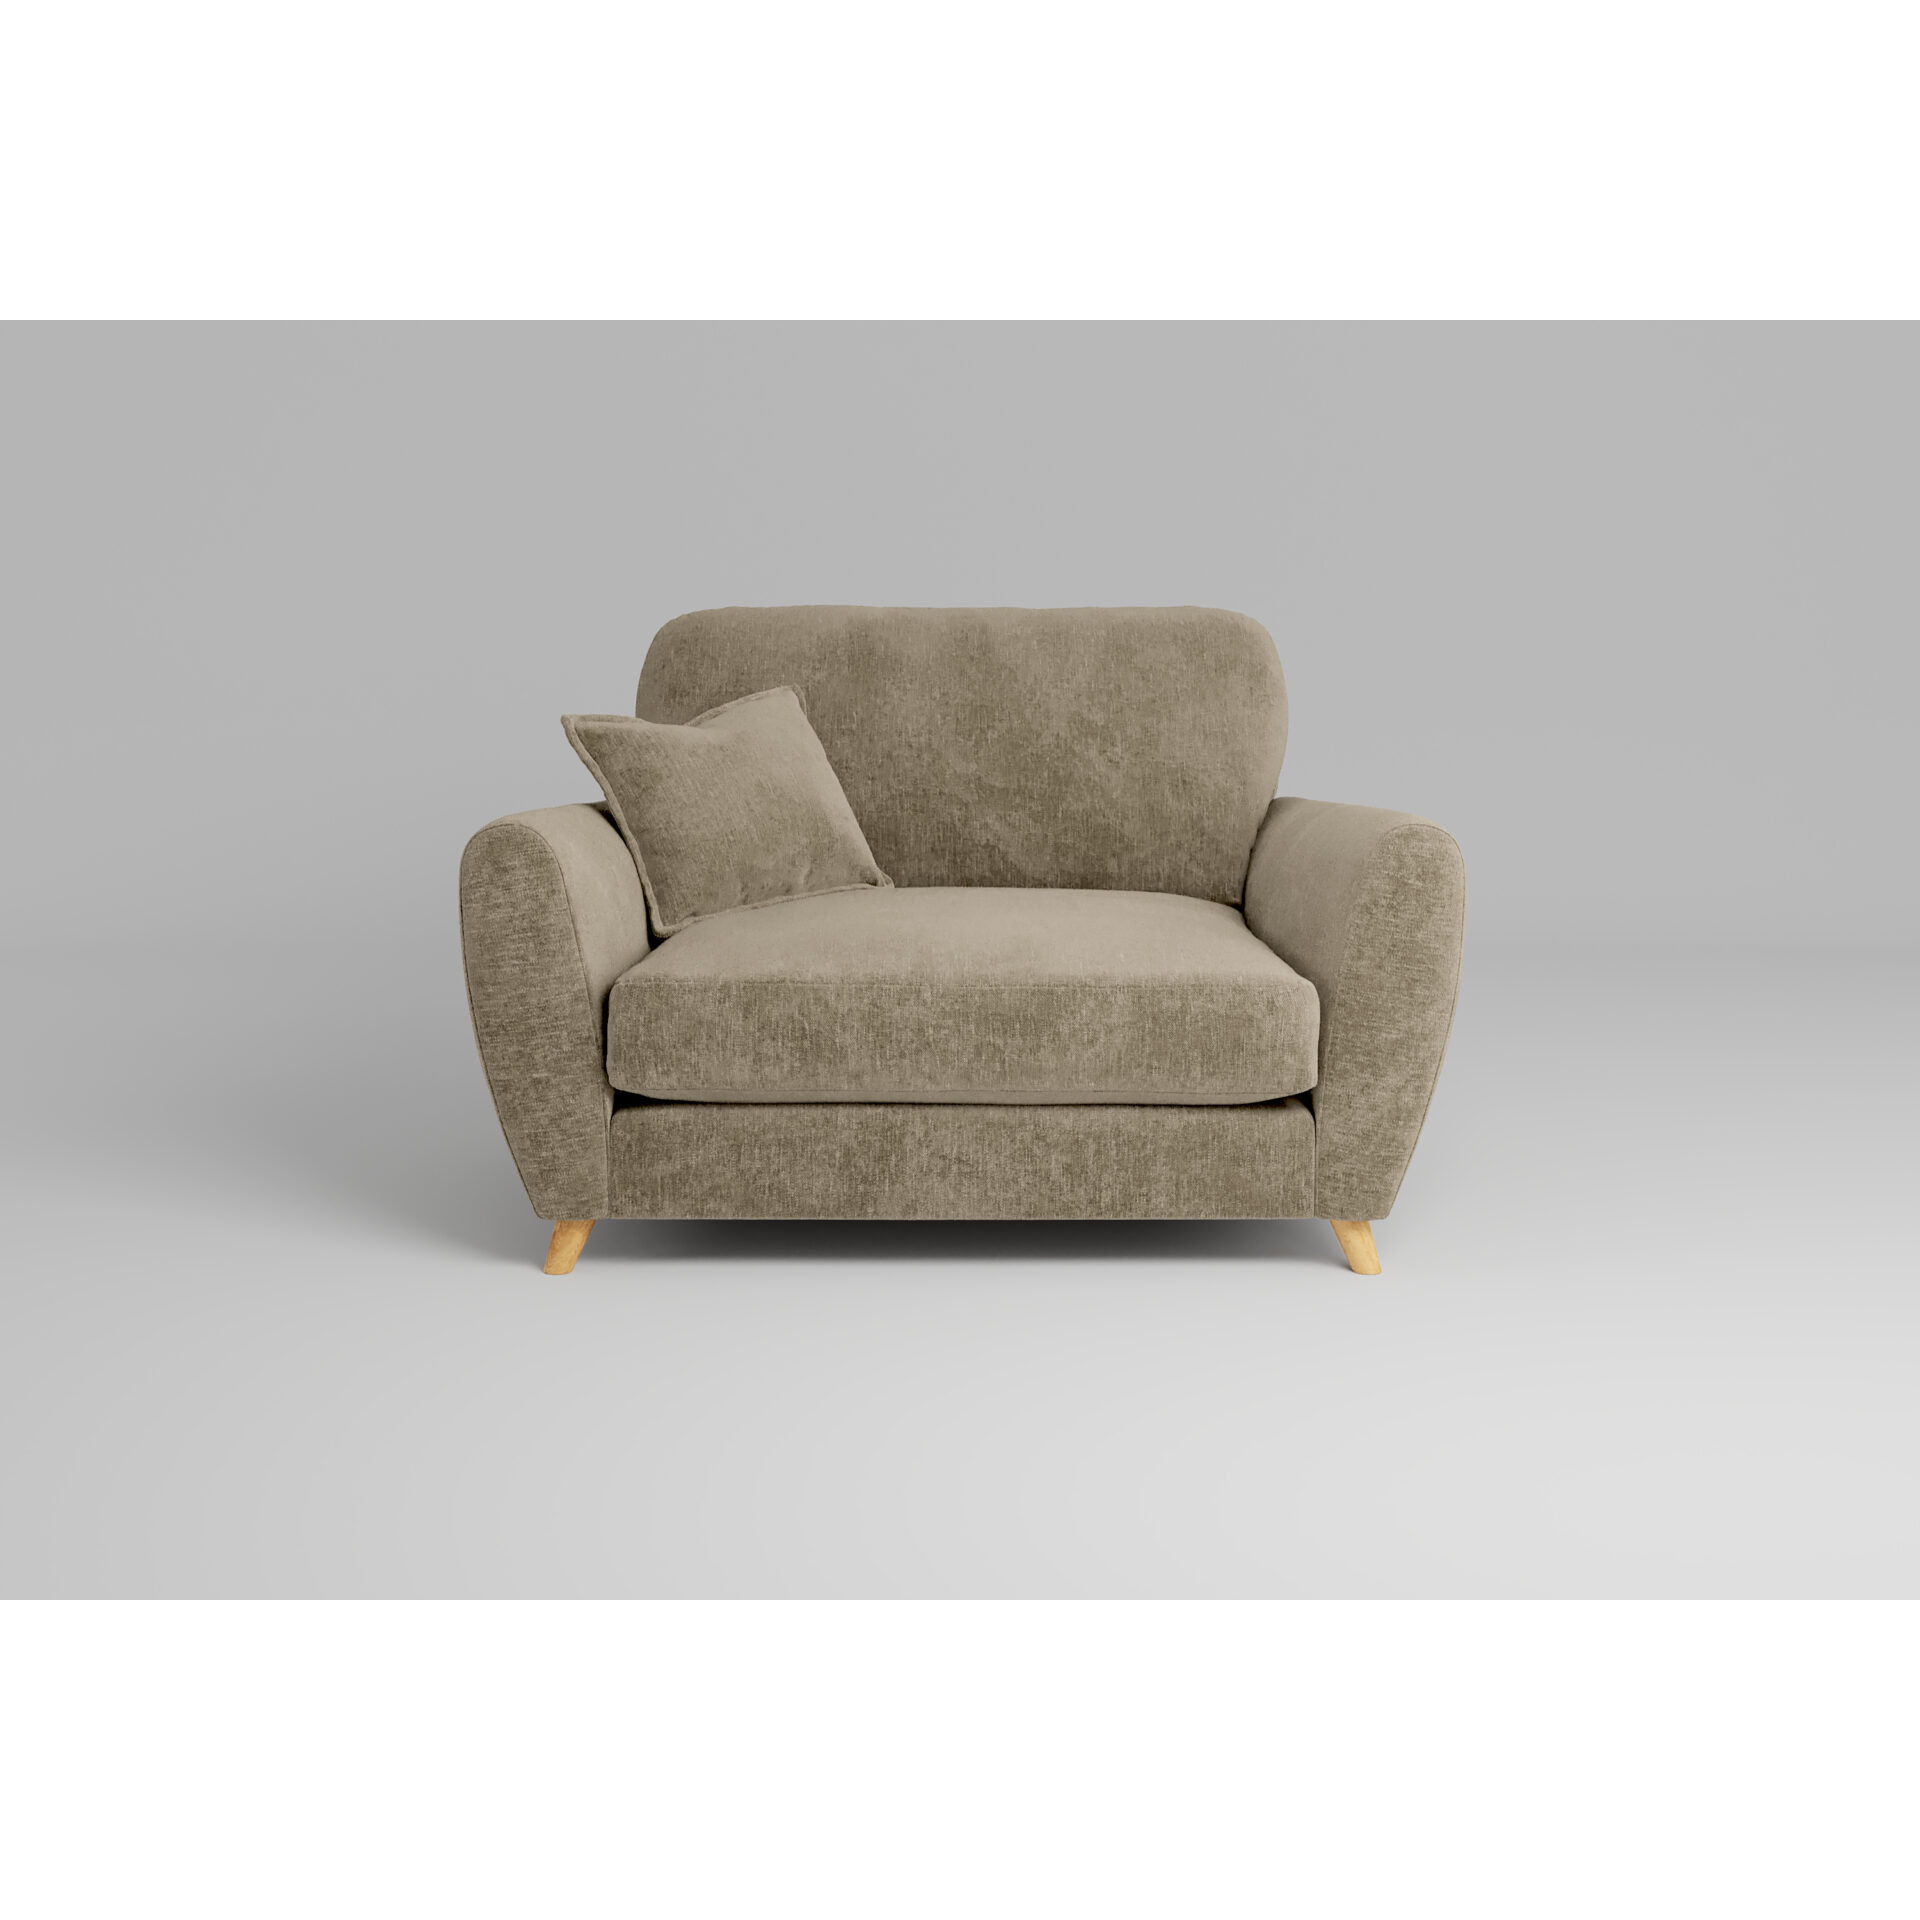 Cloud Nine Beige Chenille Loveseat - Perfect for Relaxation | Zofa